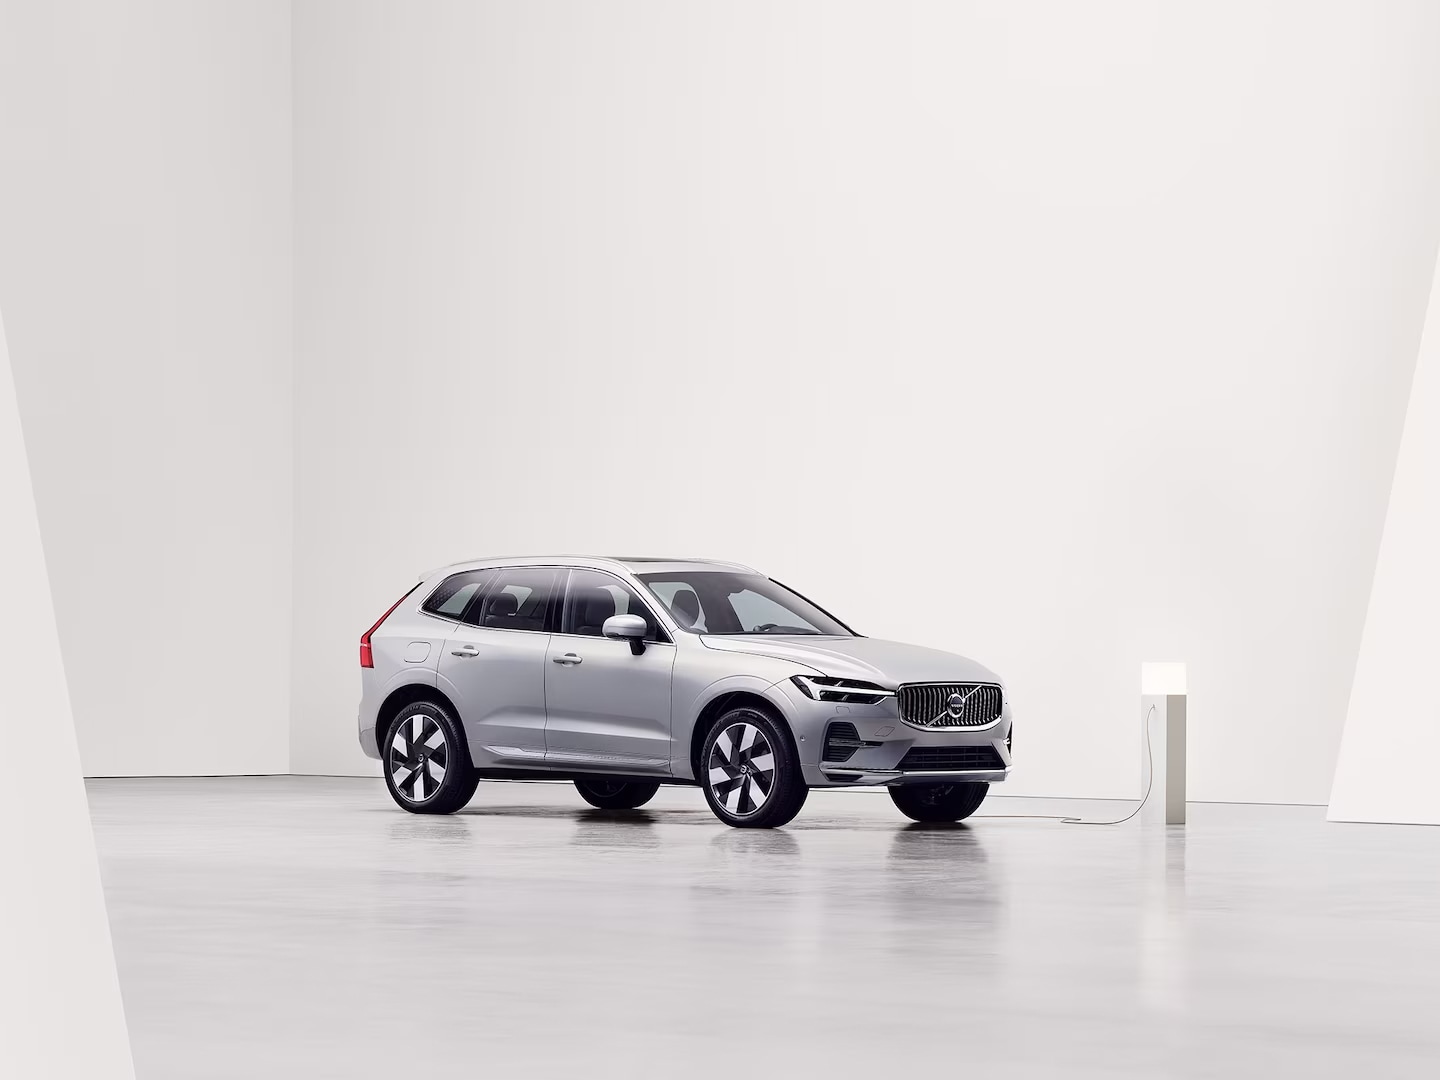 Side view of grey Volvo XC60 Recharge being charged at charging station.